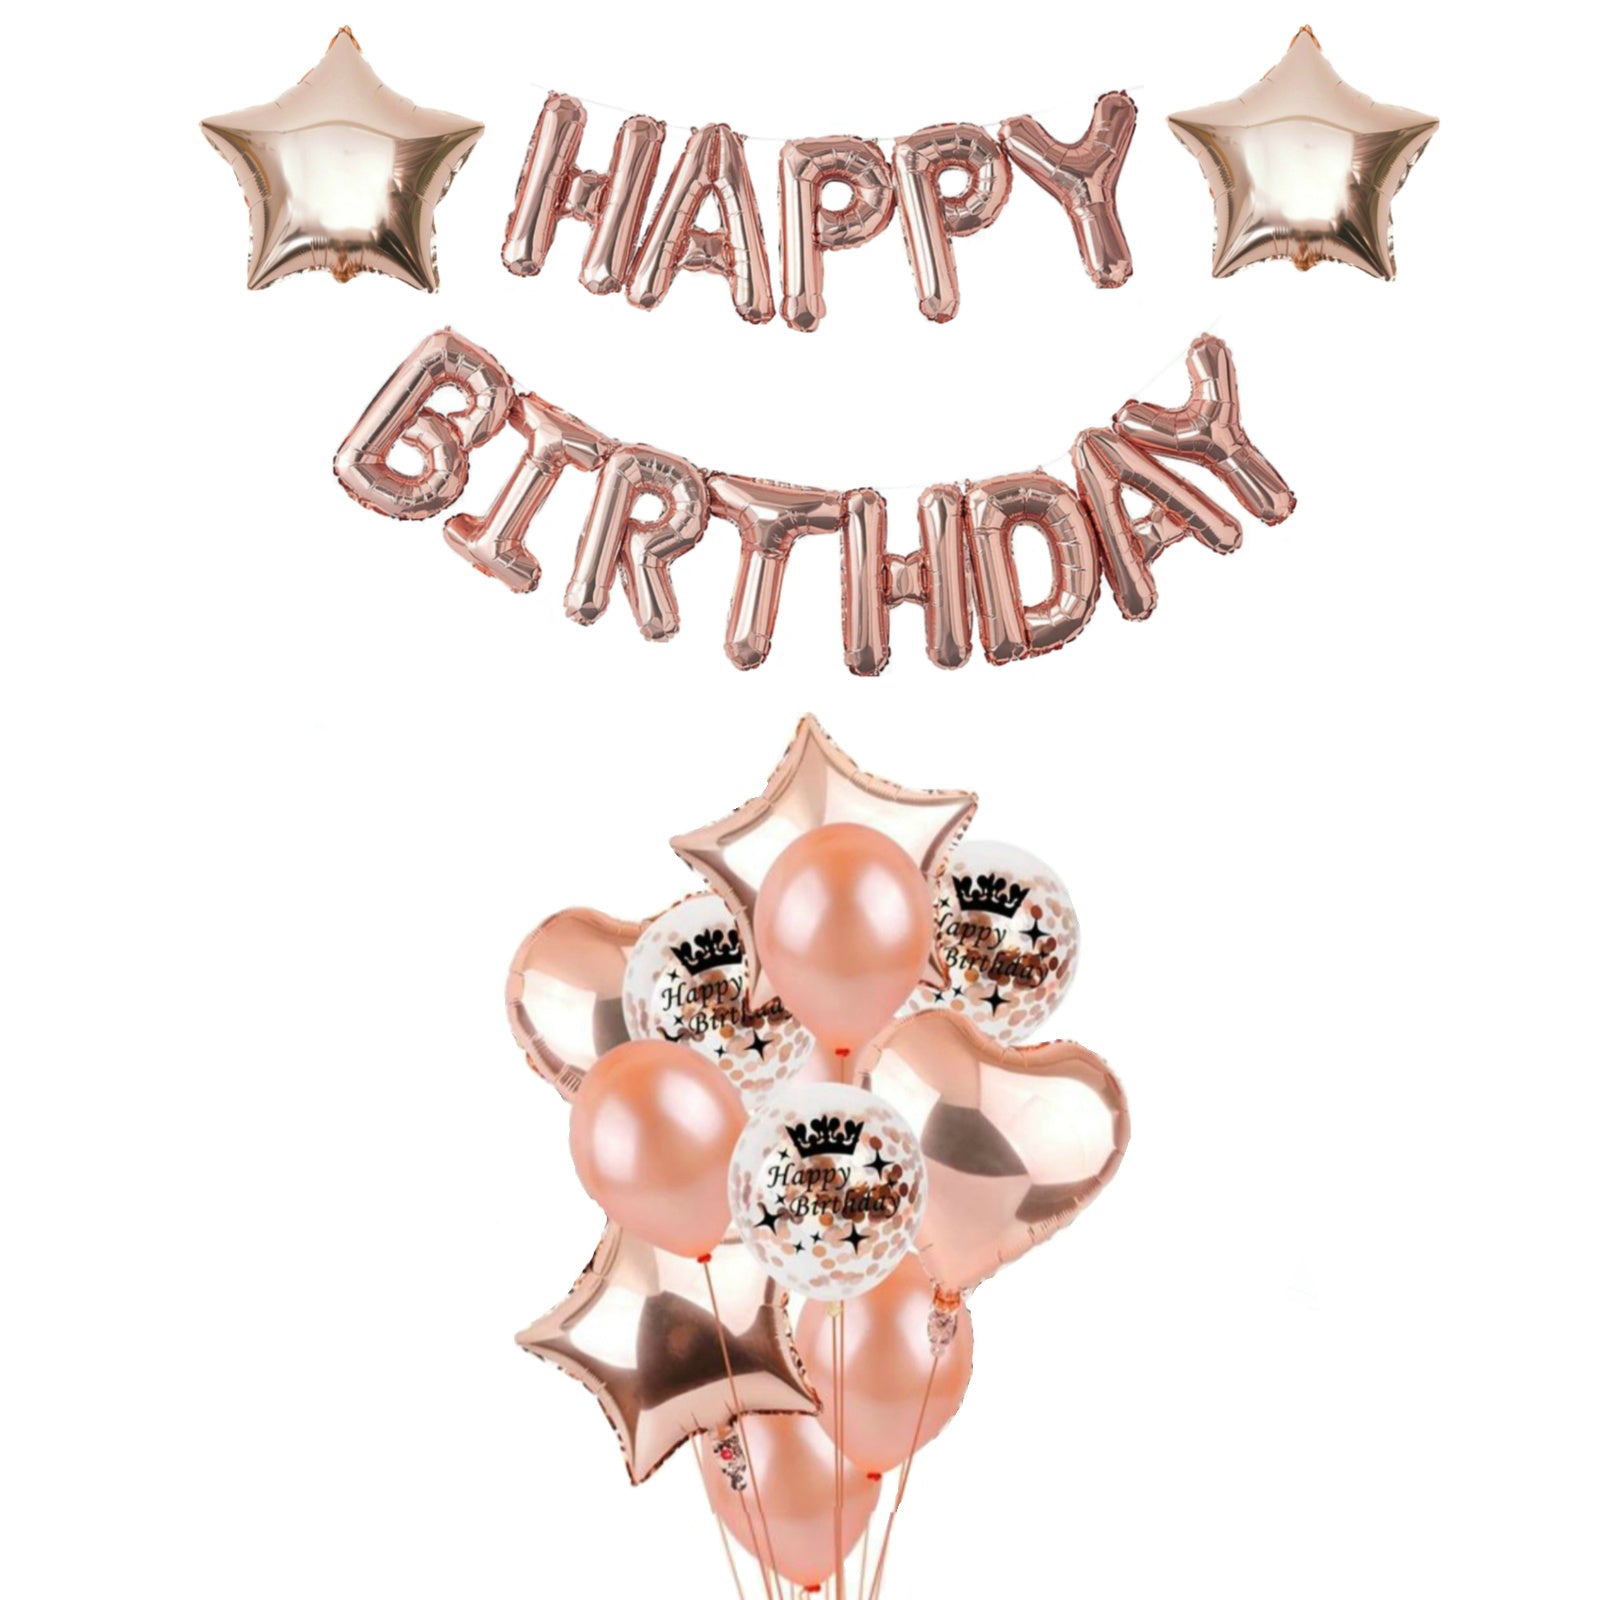 Rose Gold Birthday Decorations, Happy Birthday and Balloon Bouquet